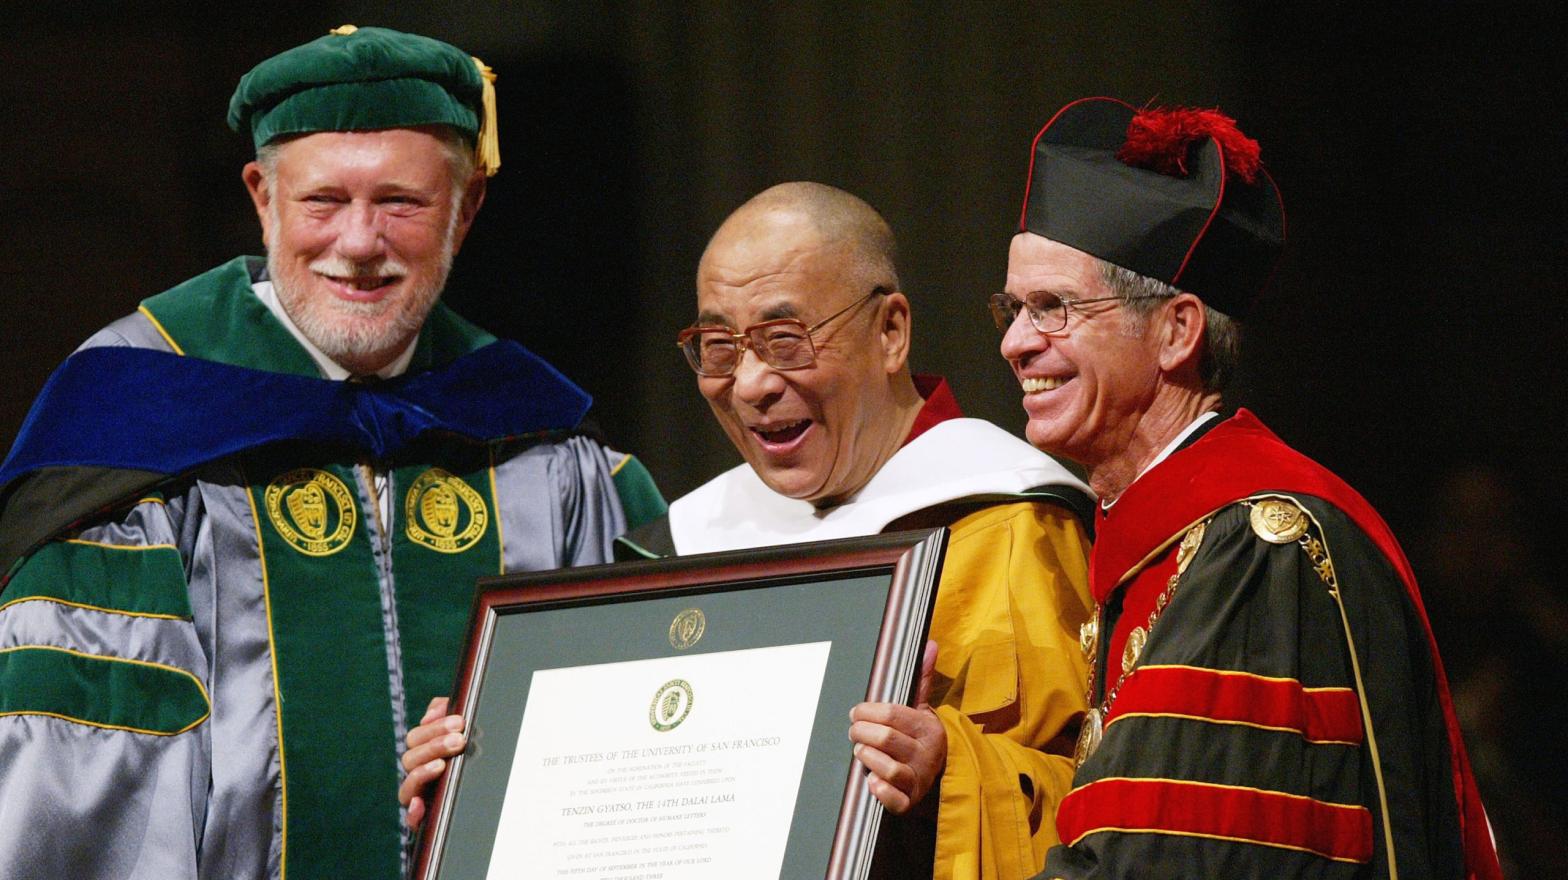 Adobe co-founder and University of San Francisco chairman Charles Geschke (left) presents an honorary degree to the Dalai Lama alongside USF president Steven Privett (right) in San Francisco, California in 2003.  (Photo: Justin Sullivan, Getty Images)